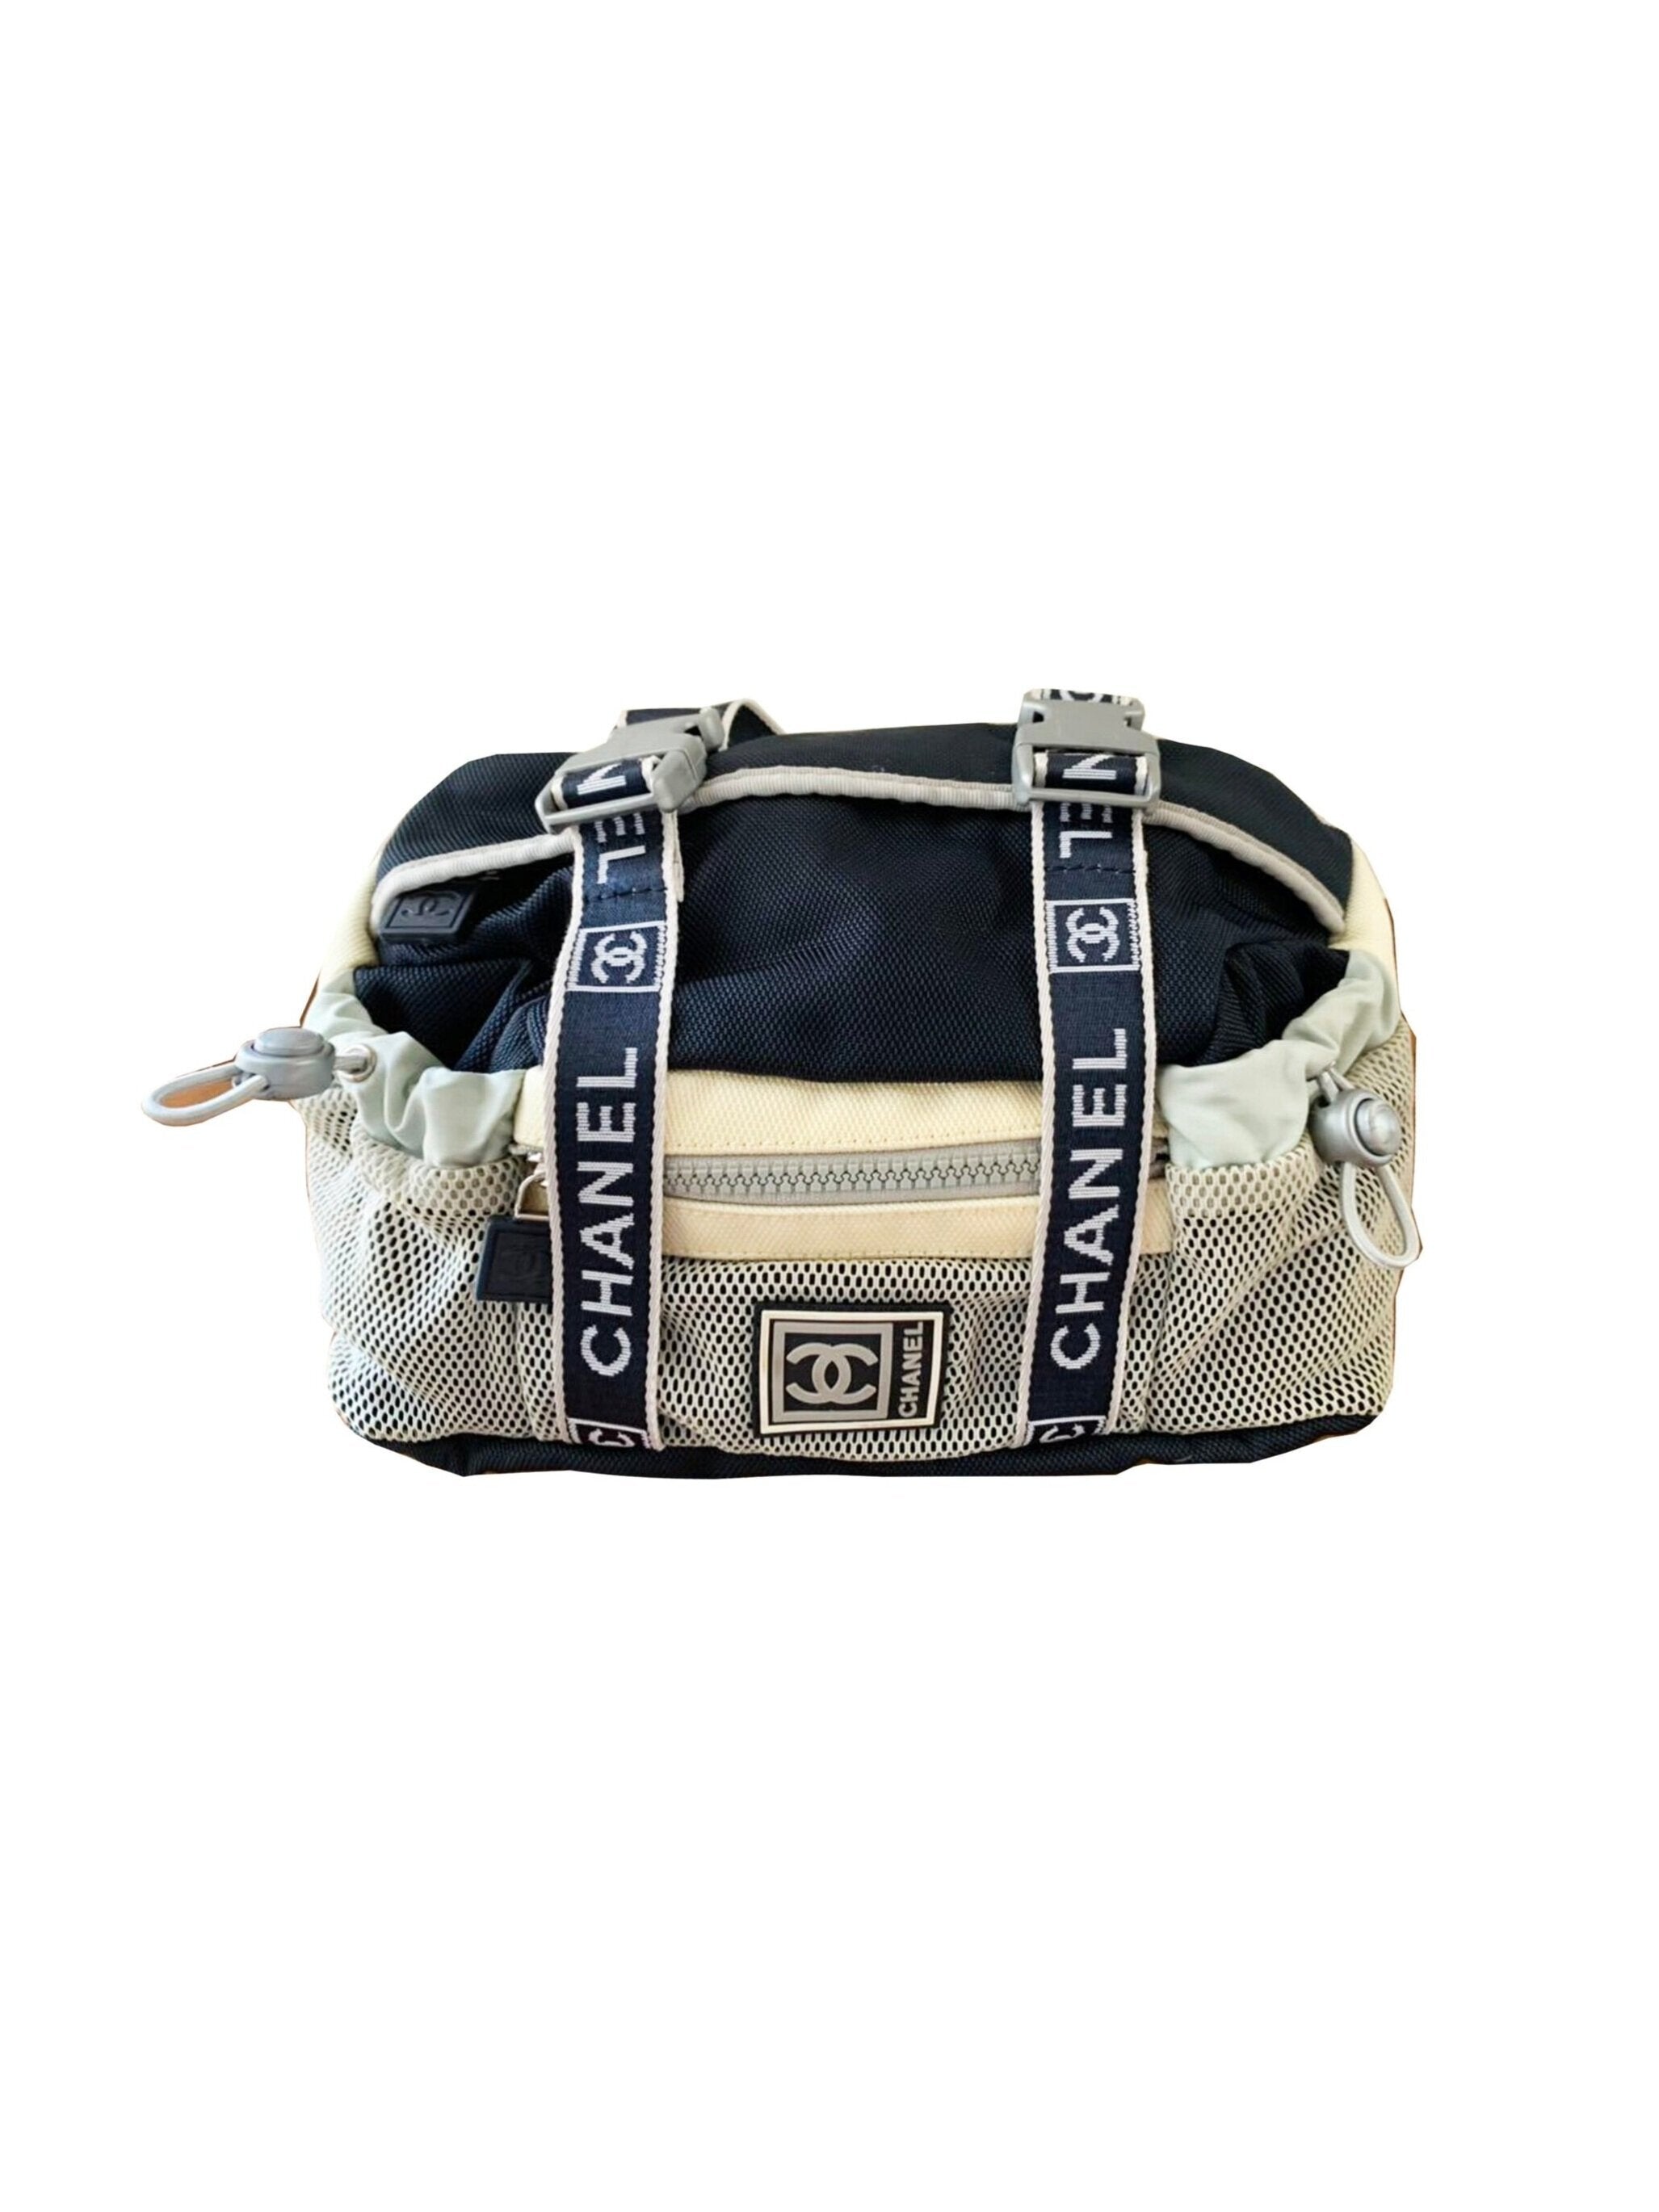 Chanel Chanel Sports Line Navy Canvas Waist Pouch Bag